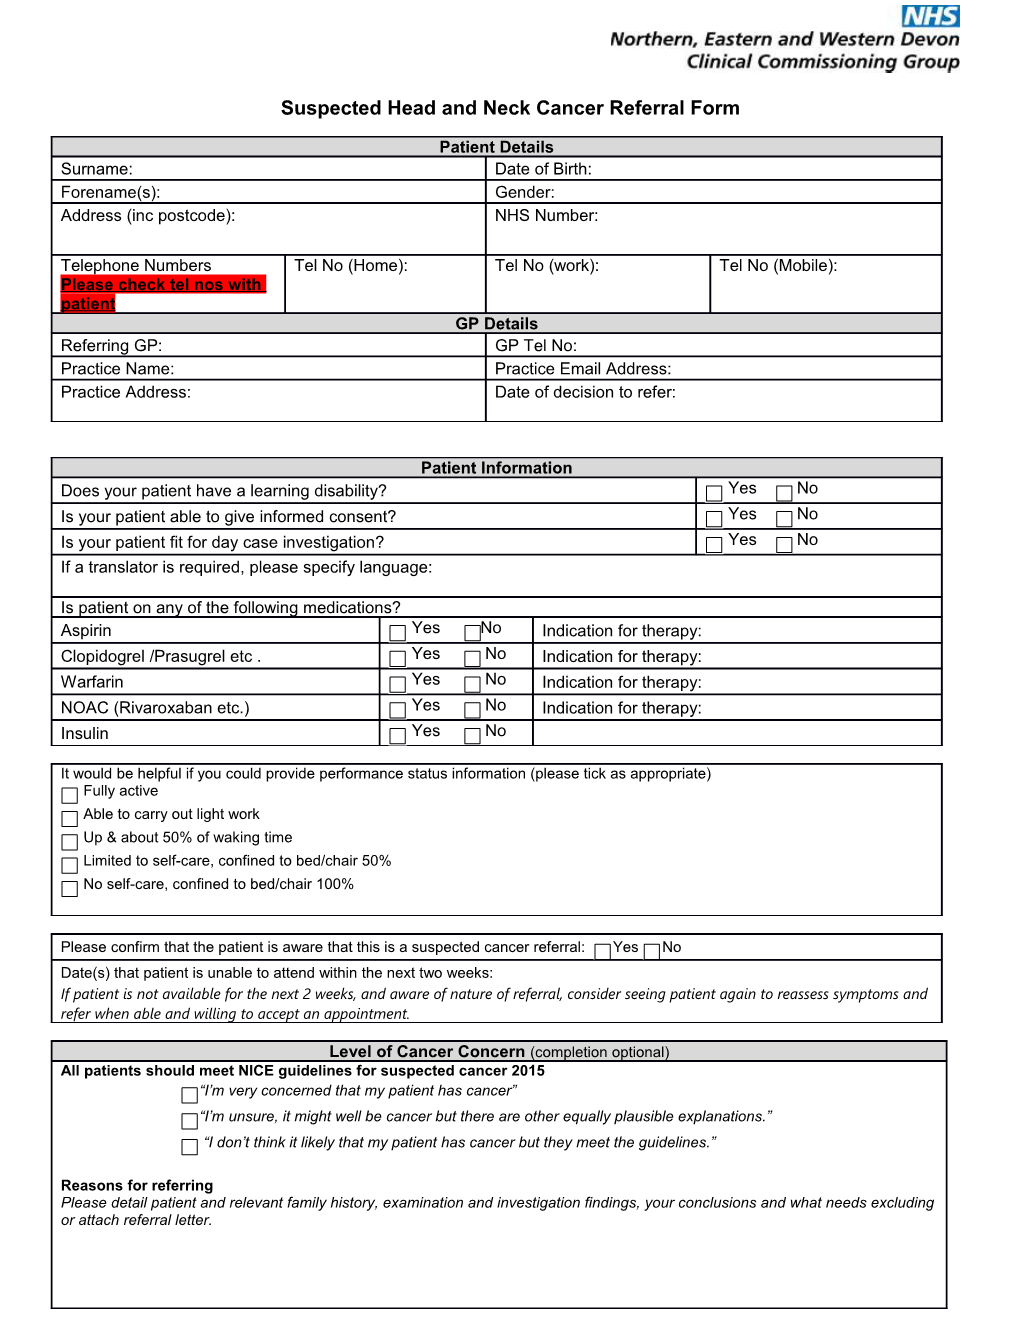 Suspected Head and Neck Cancer Referral Form